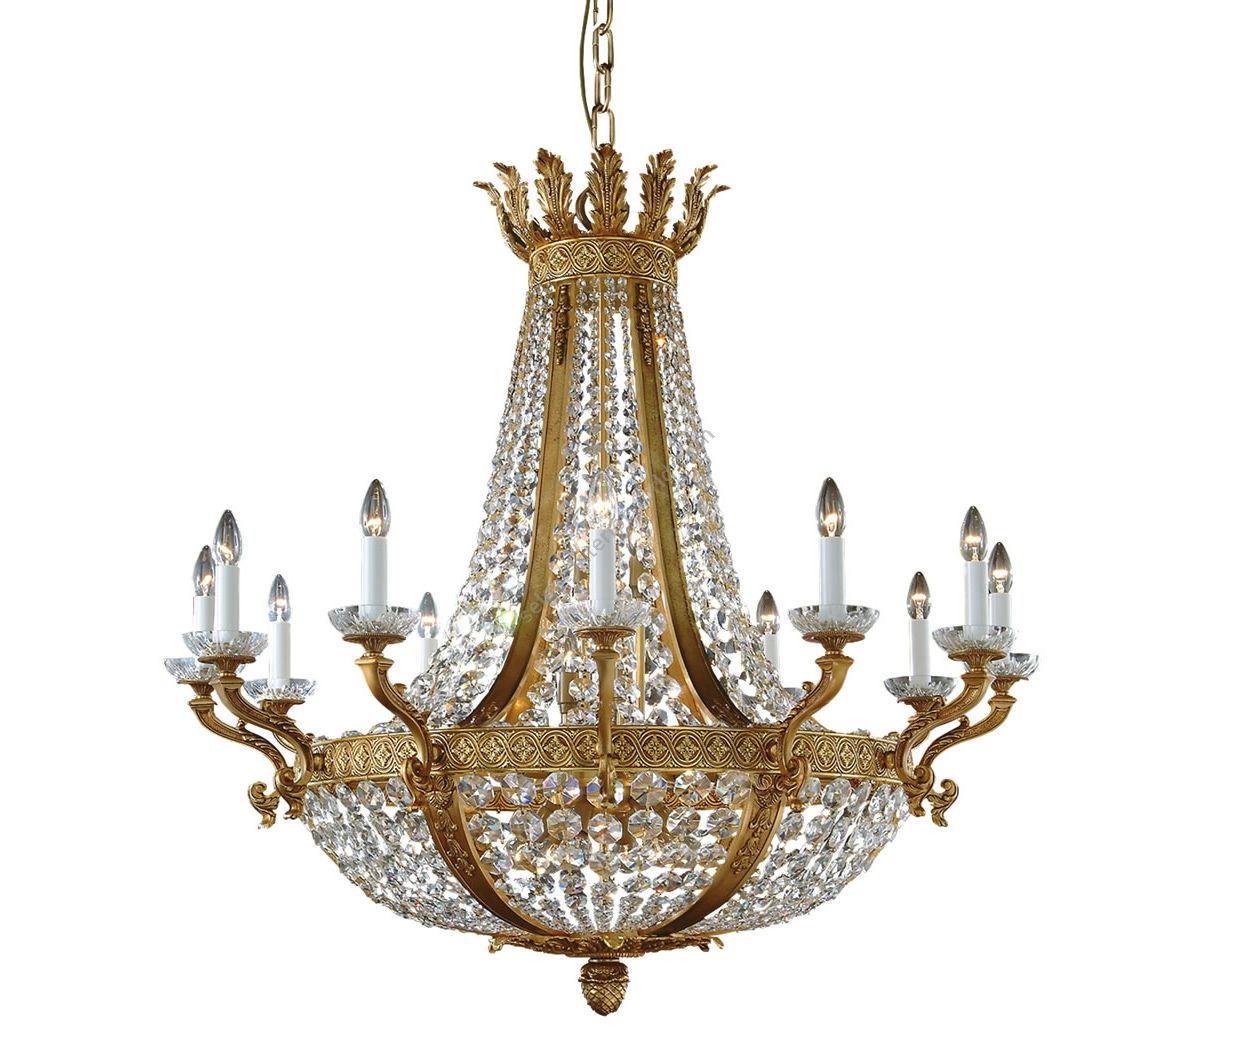 Mariner / Luxury Large Chandelier Made With Casted Bronze & Scholer Crystals / 19560